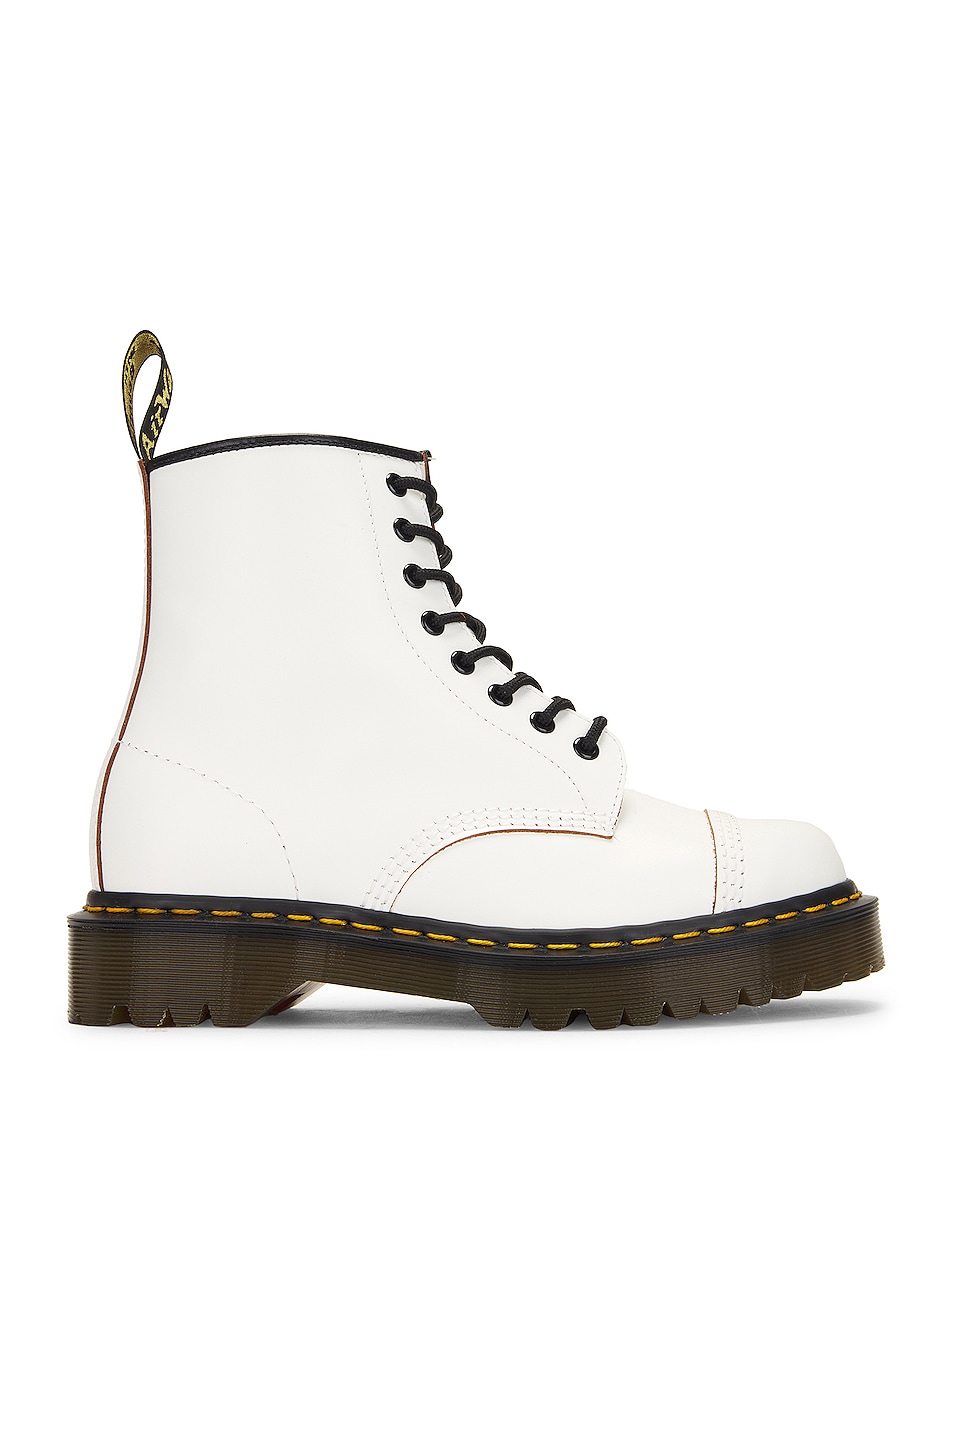 Image 1 of Dr. Martens Made in England 1460 Toe Cap Bex in White